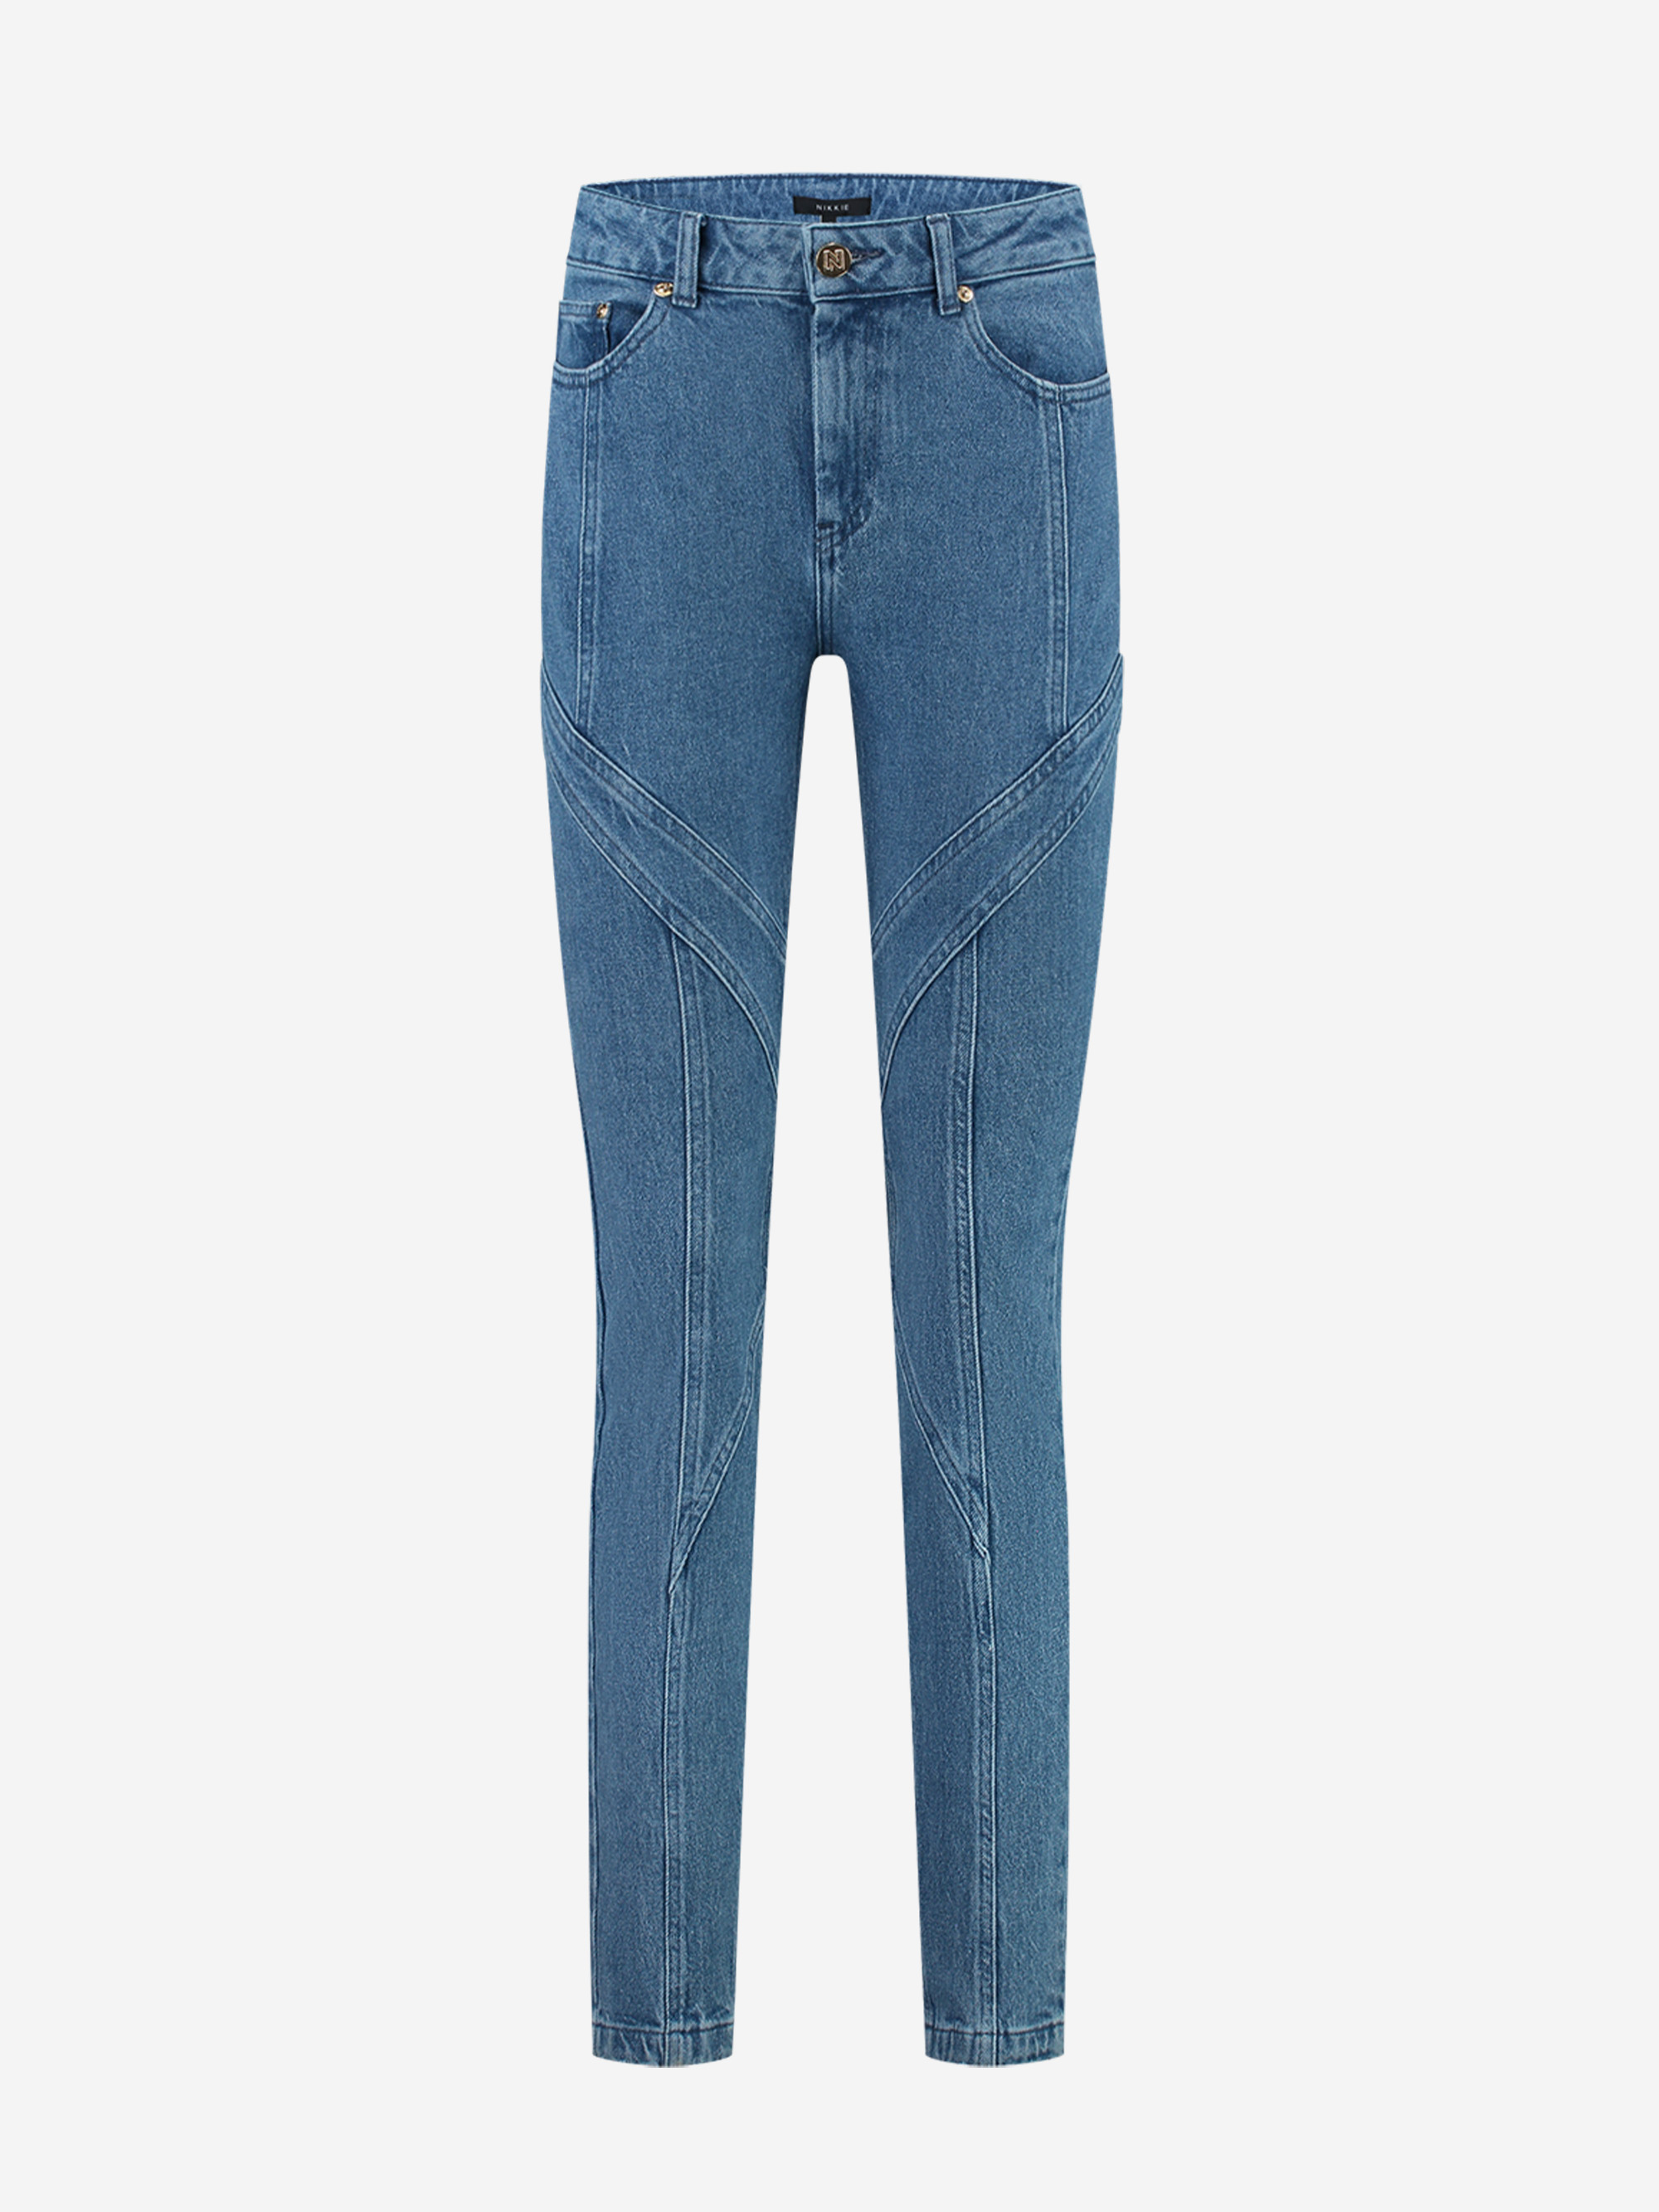 Skinny jeans with line detail